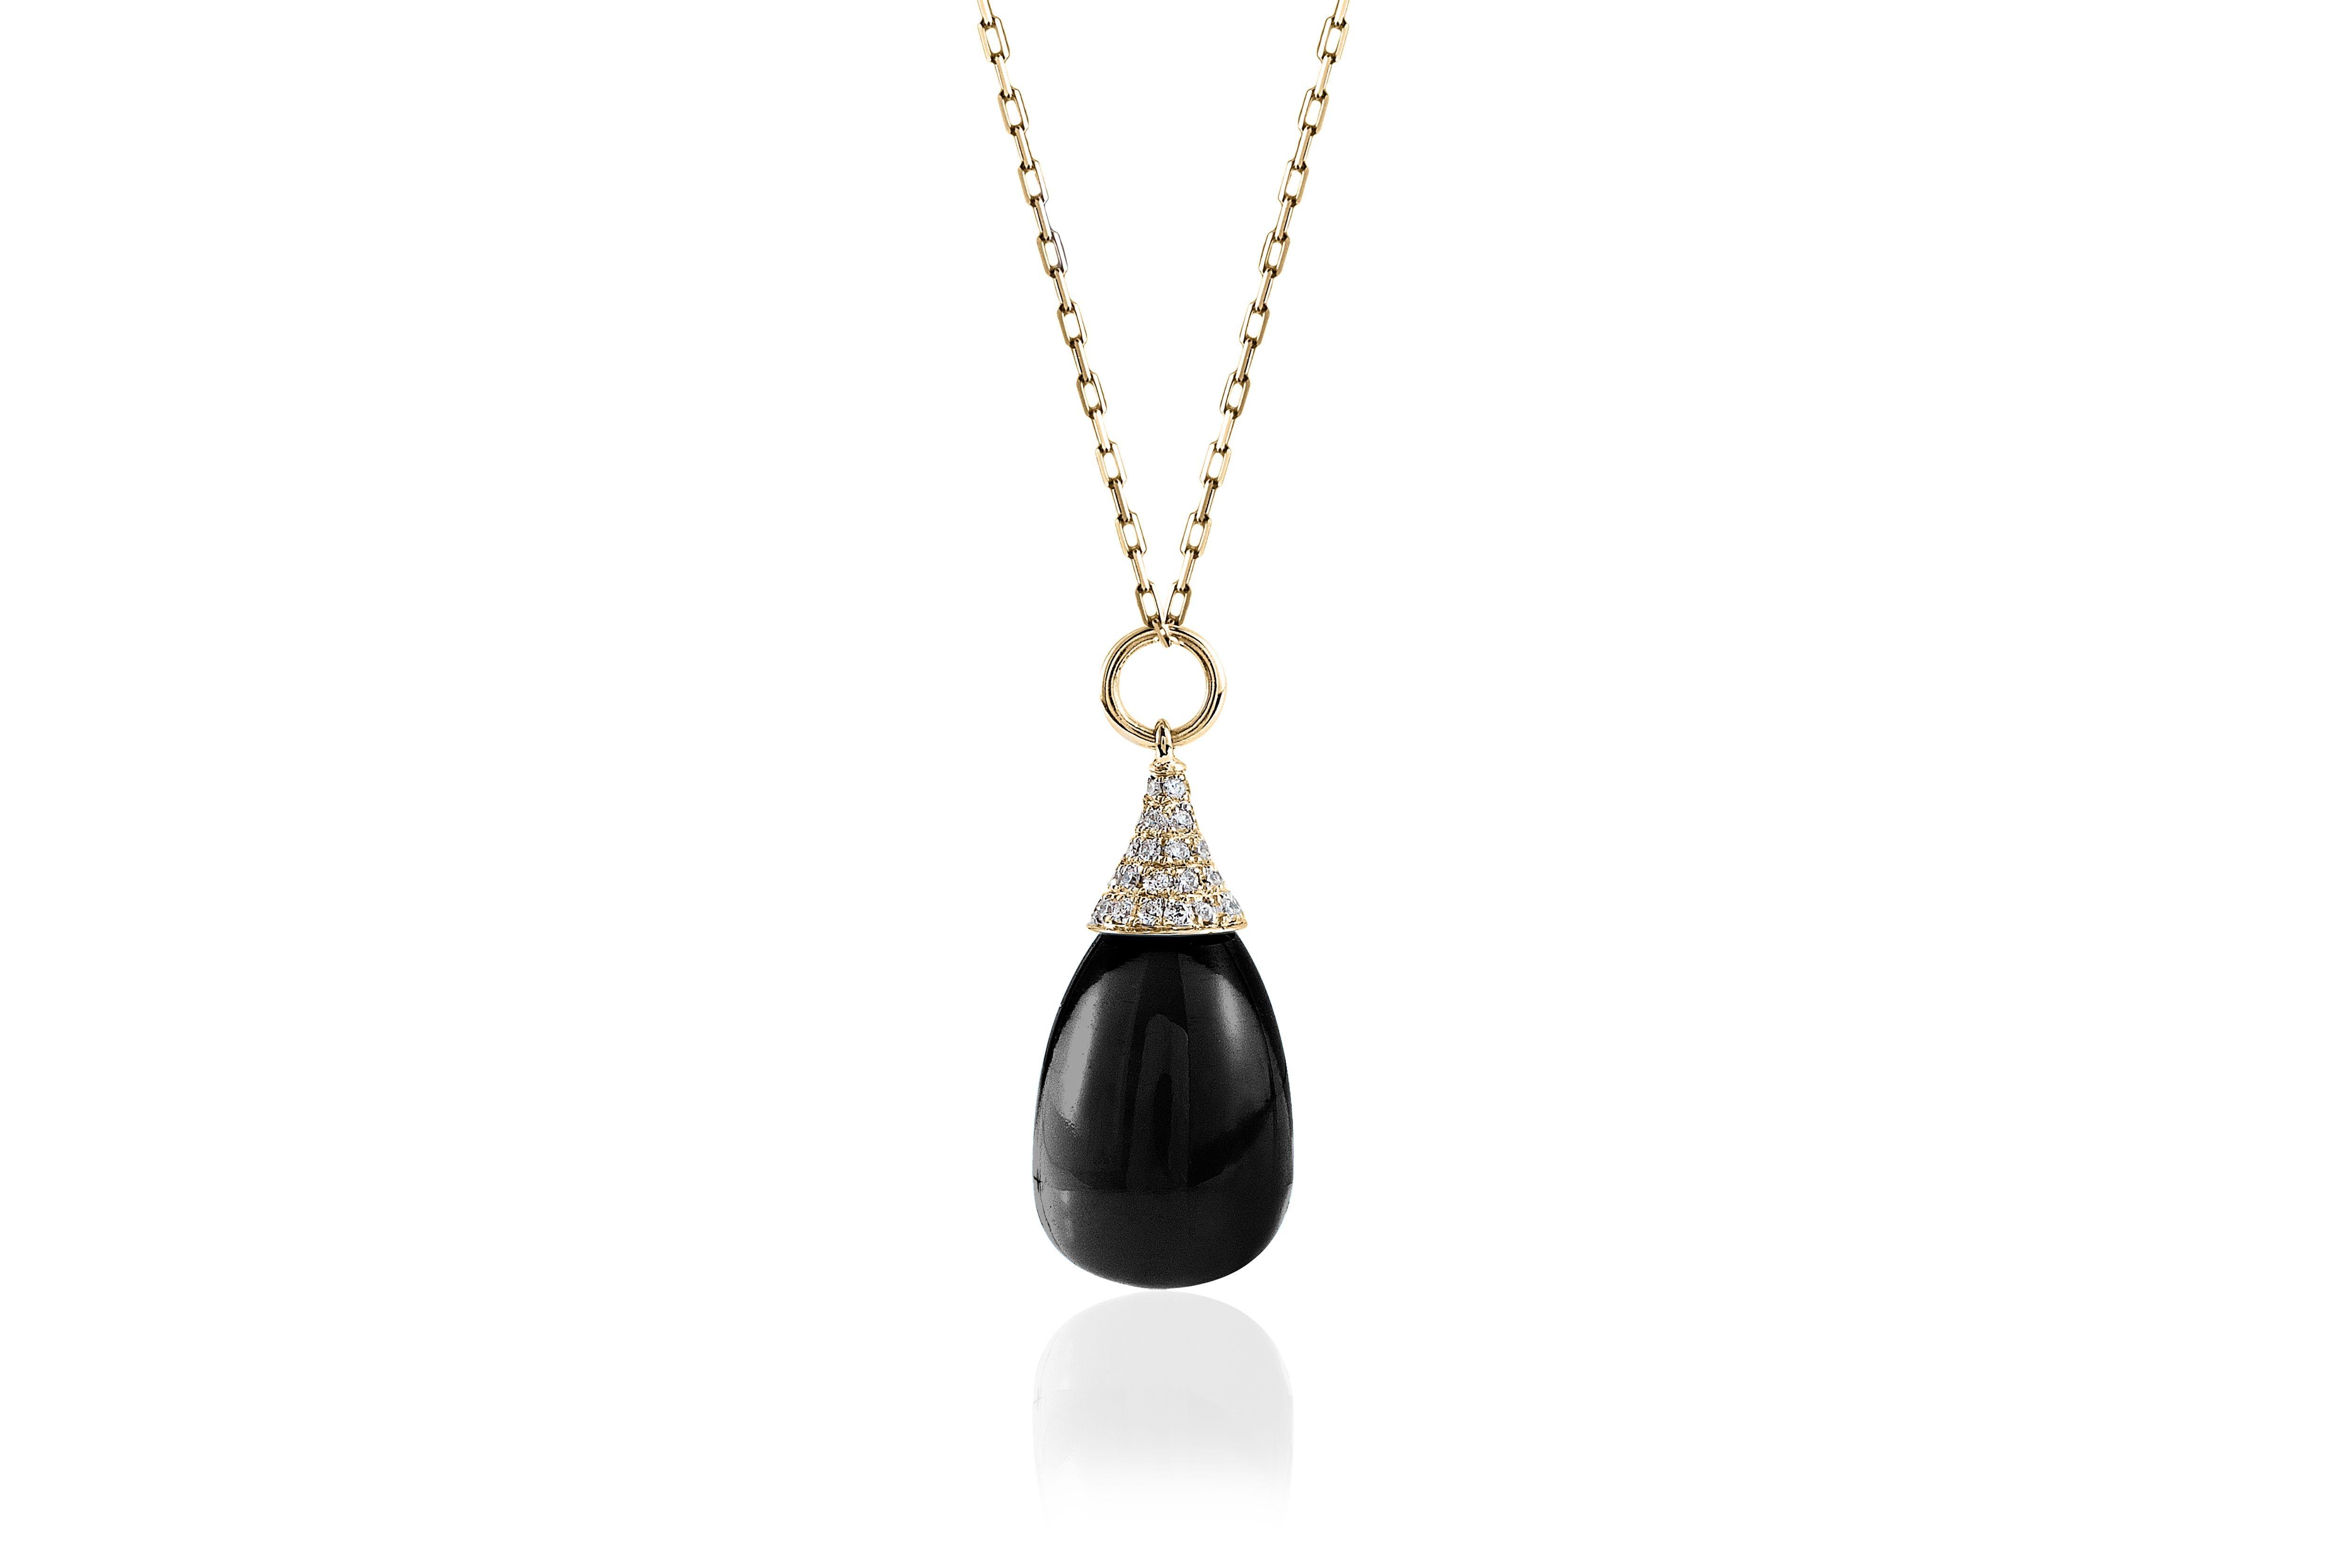 Onyx Drop Pendant with Diamond Cap in 18K Yellow Gold on an 18'' Chain from 'Naughty' Collection
 Stone Size: 19 x 12 mm 
 Diamonds: G-H / VS, Approx Wt: 0.32 Cts